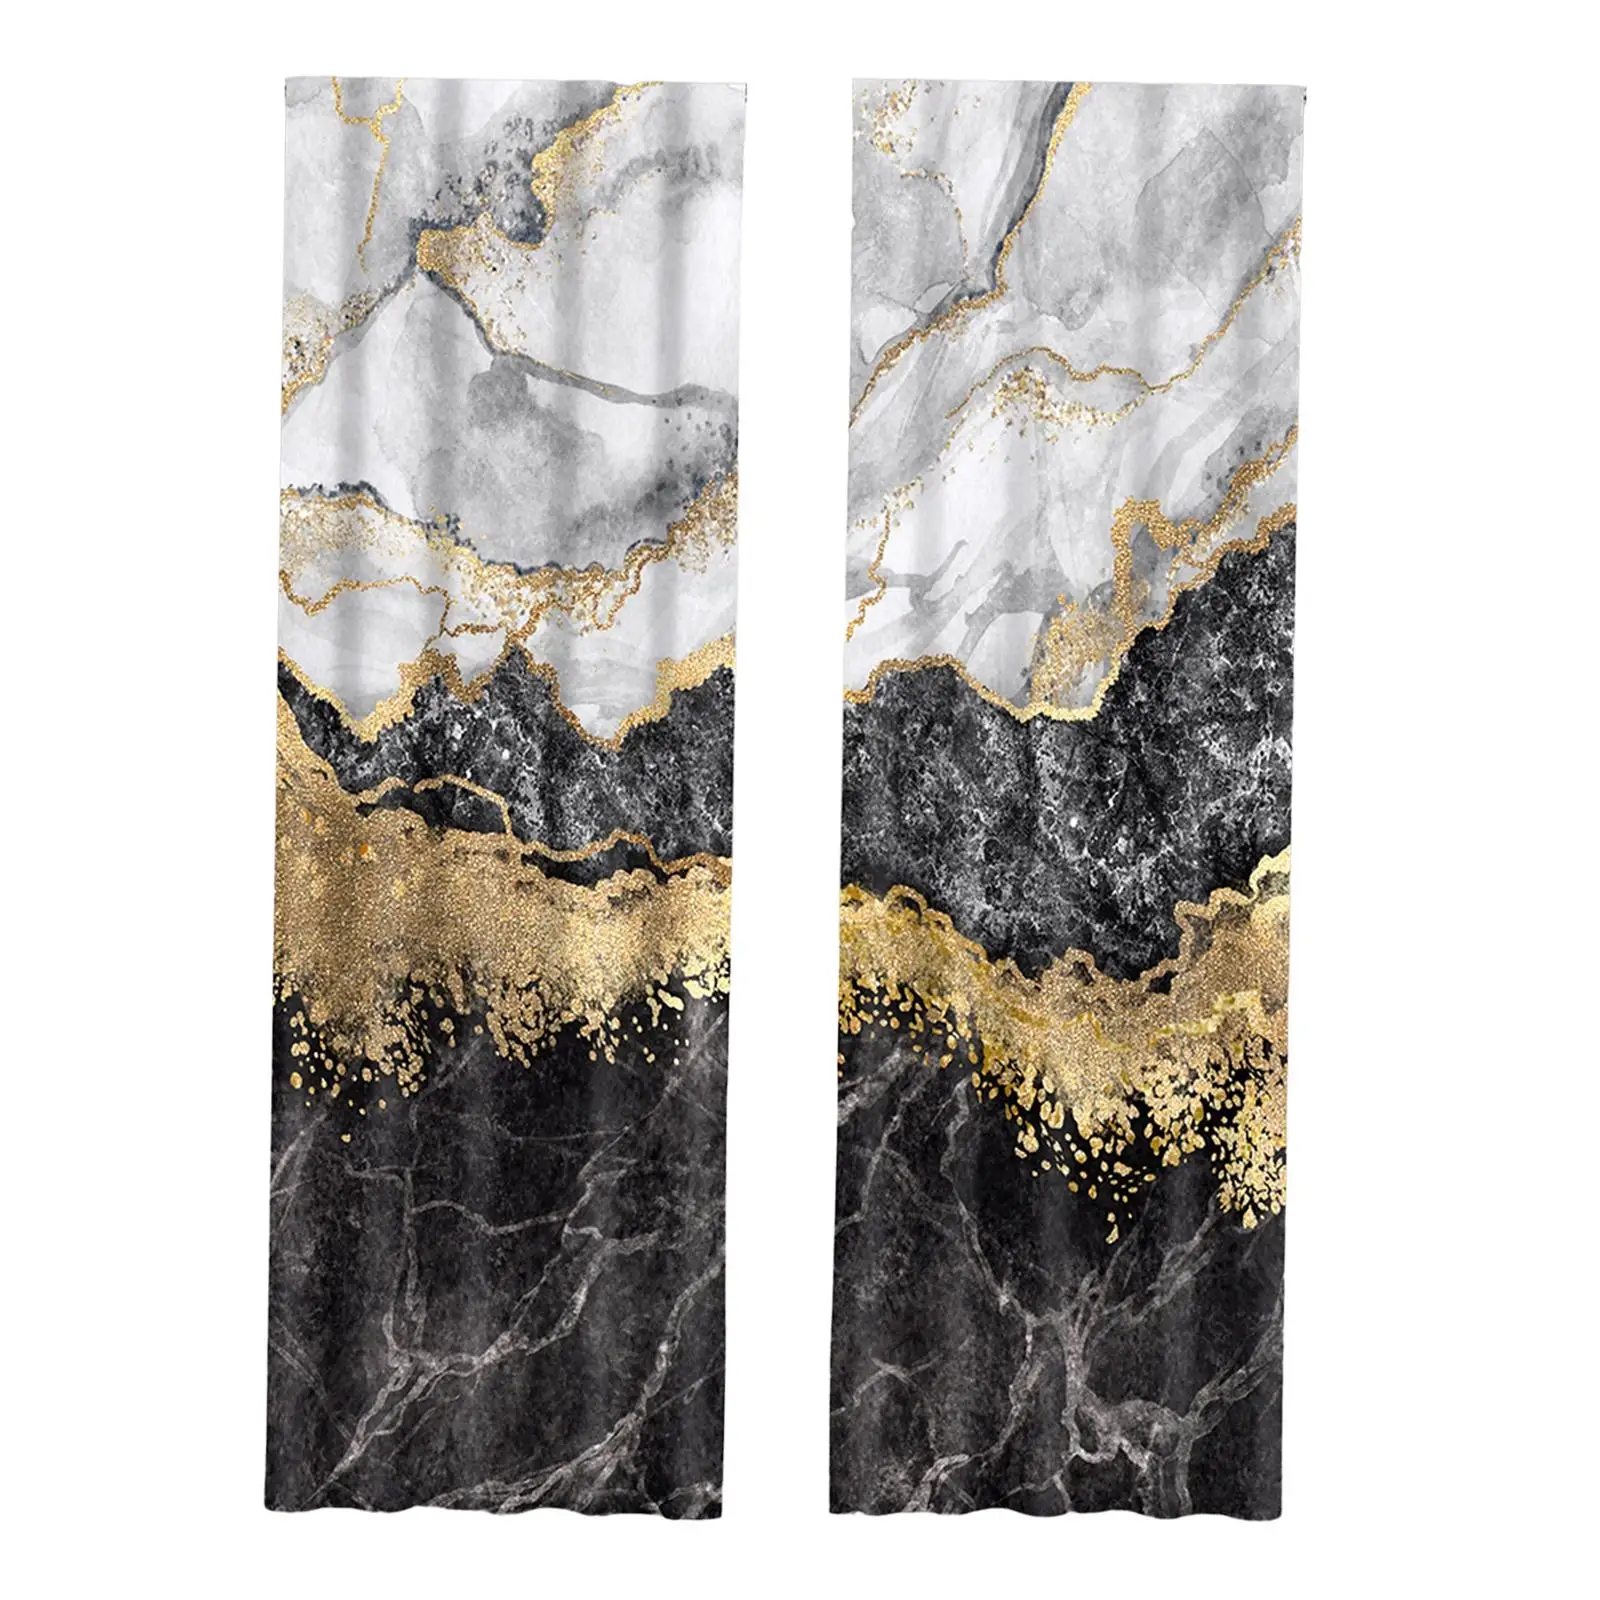 2x Marble Print Blackout Curtains 132cmx241cm Darkening Panels Drapes Valances for Window, Guestroom, Dining Room, Office, Decor